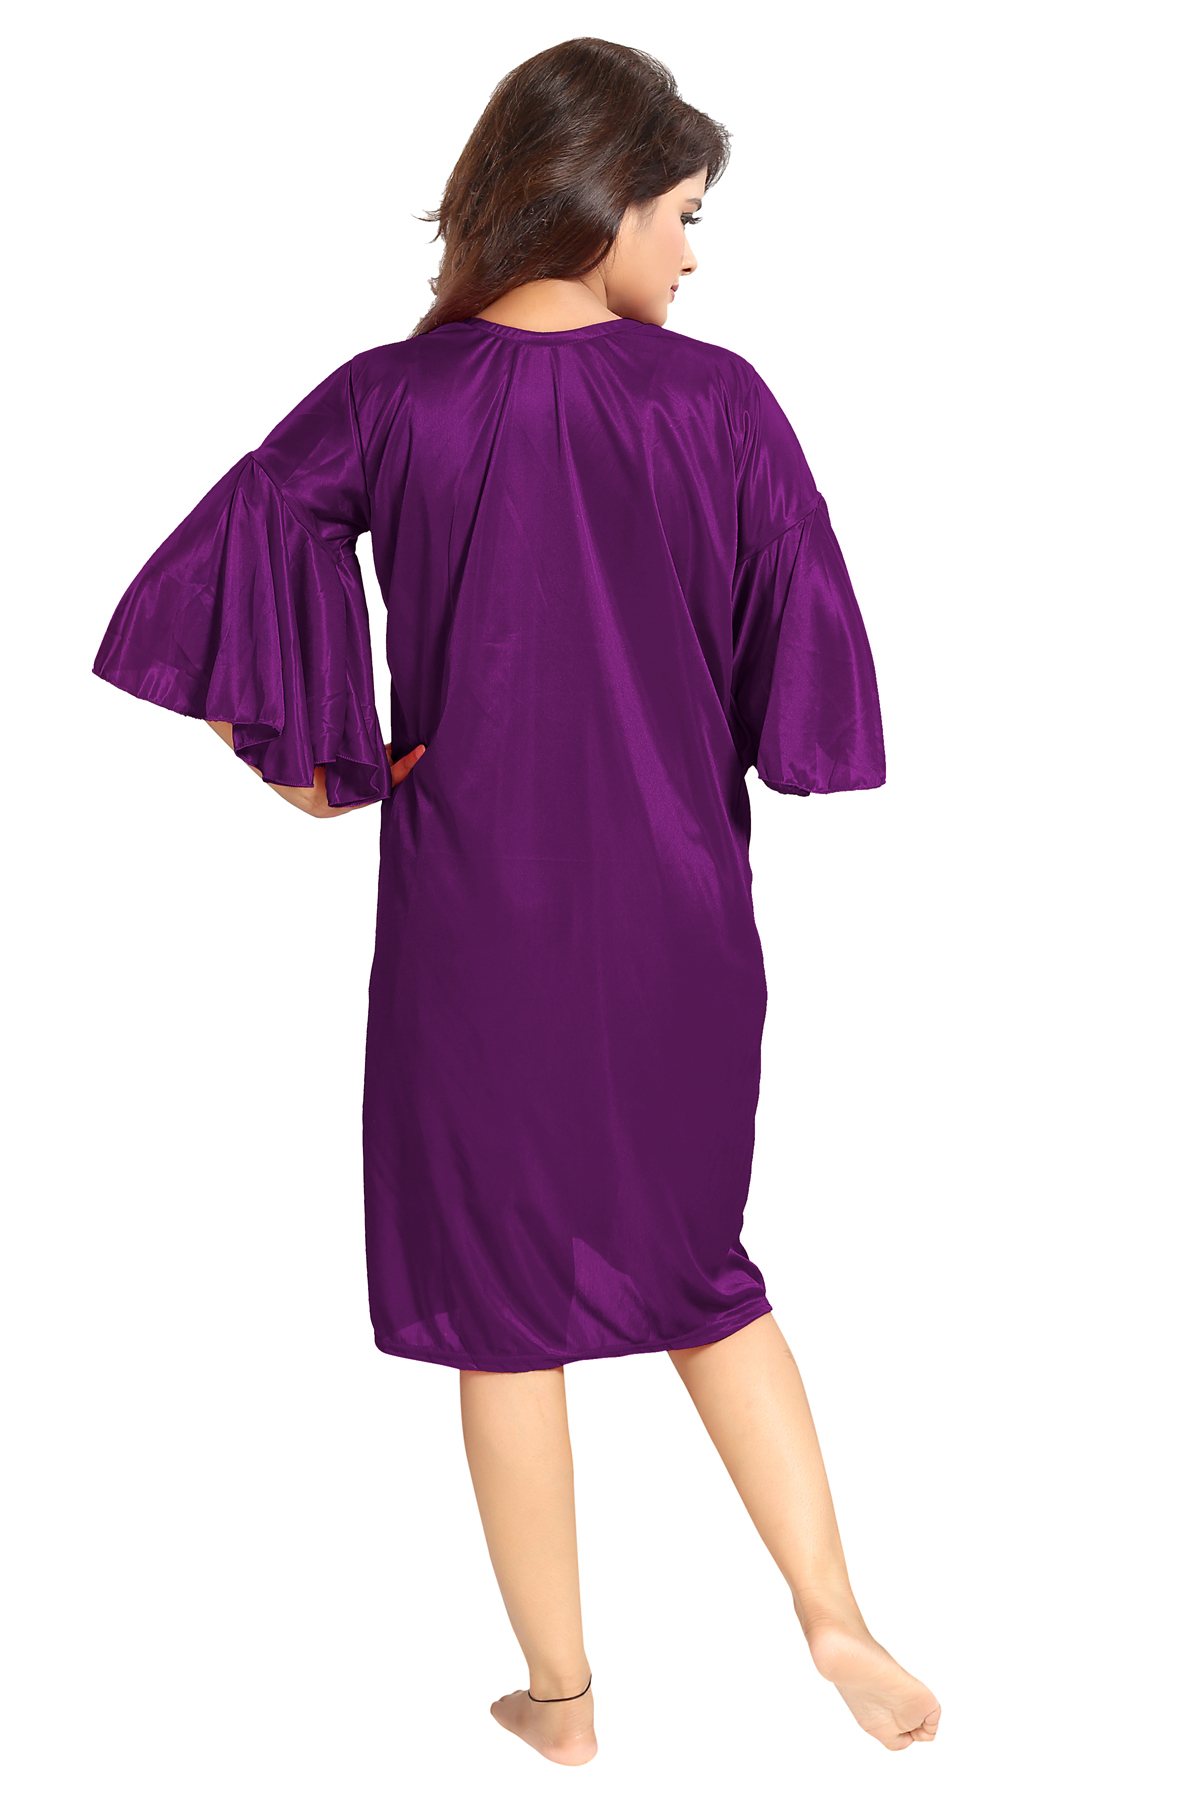 Buy Be You Purple Satin Women Nighty with Robe Online @ ₹799 from ShopClues